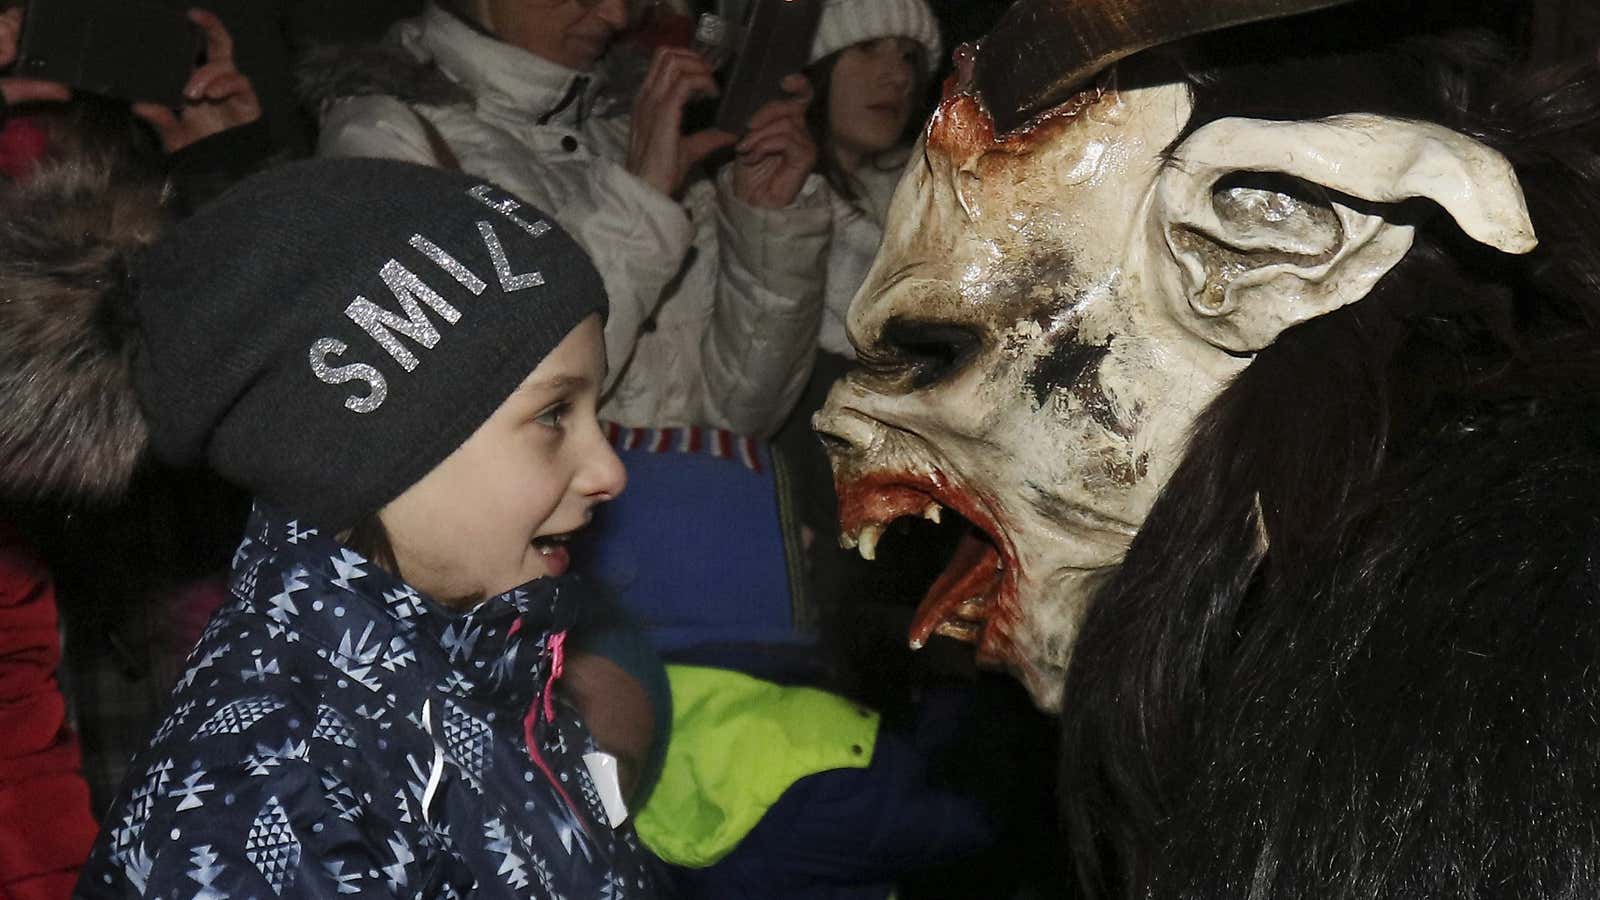 A Krampus scares spectators during a traditional Krampus run in which men and women dress up as pagan Krampus figures to scare people in Hollabrunn, Austria, Saturday, Dec.1, 2018. (AP Photo/Ronald Zak)